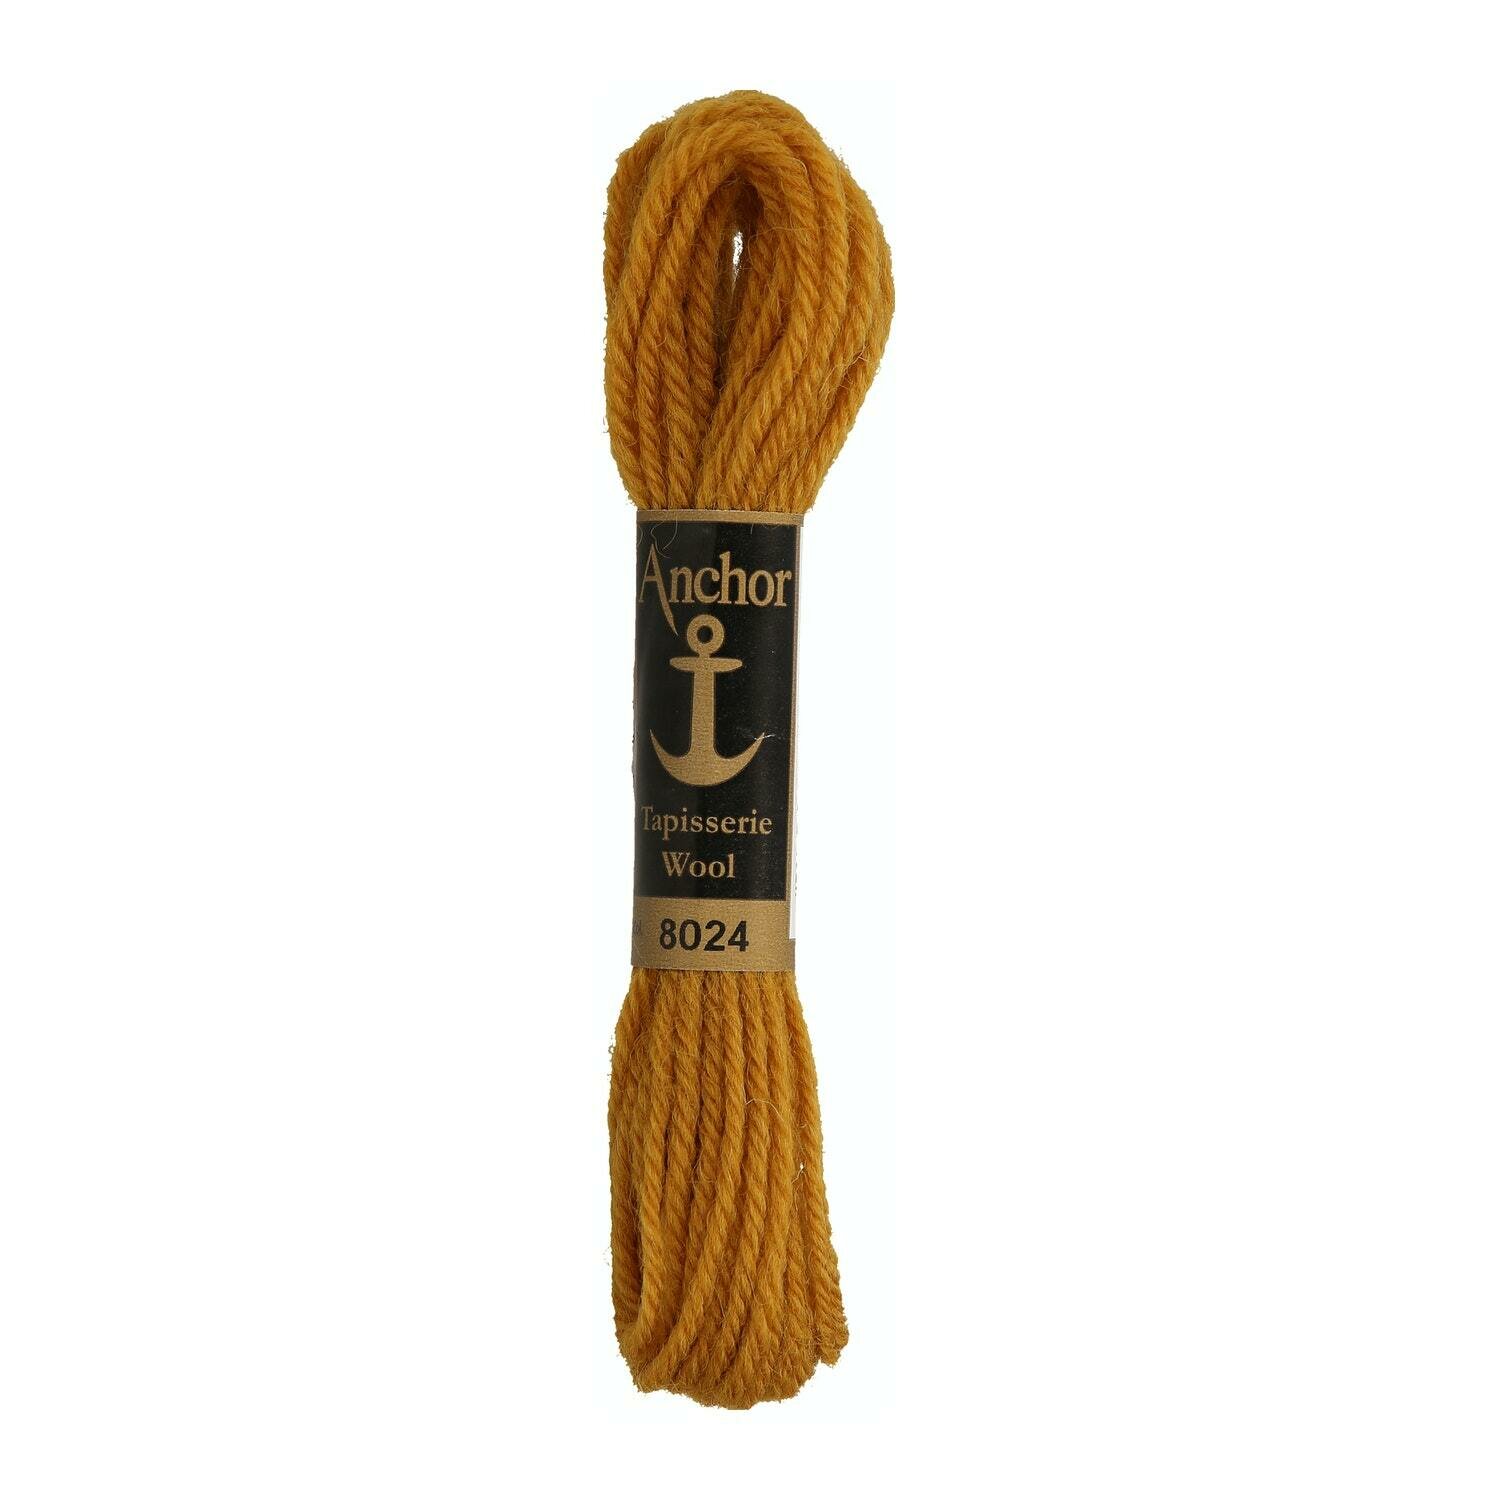 Anchor Tapisserie Wool # 08024